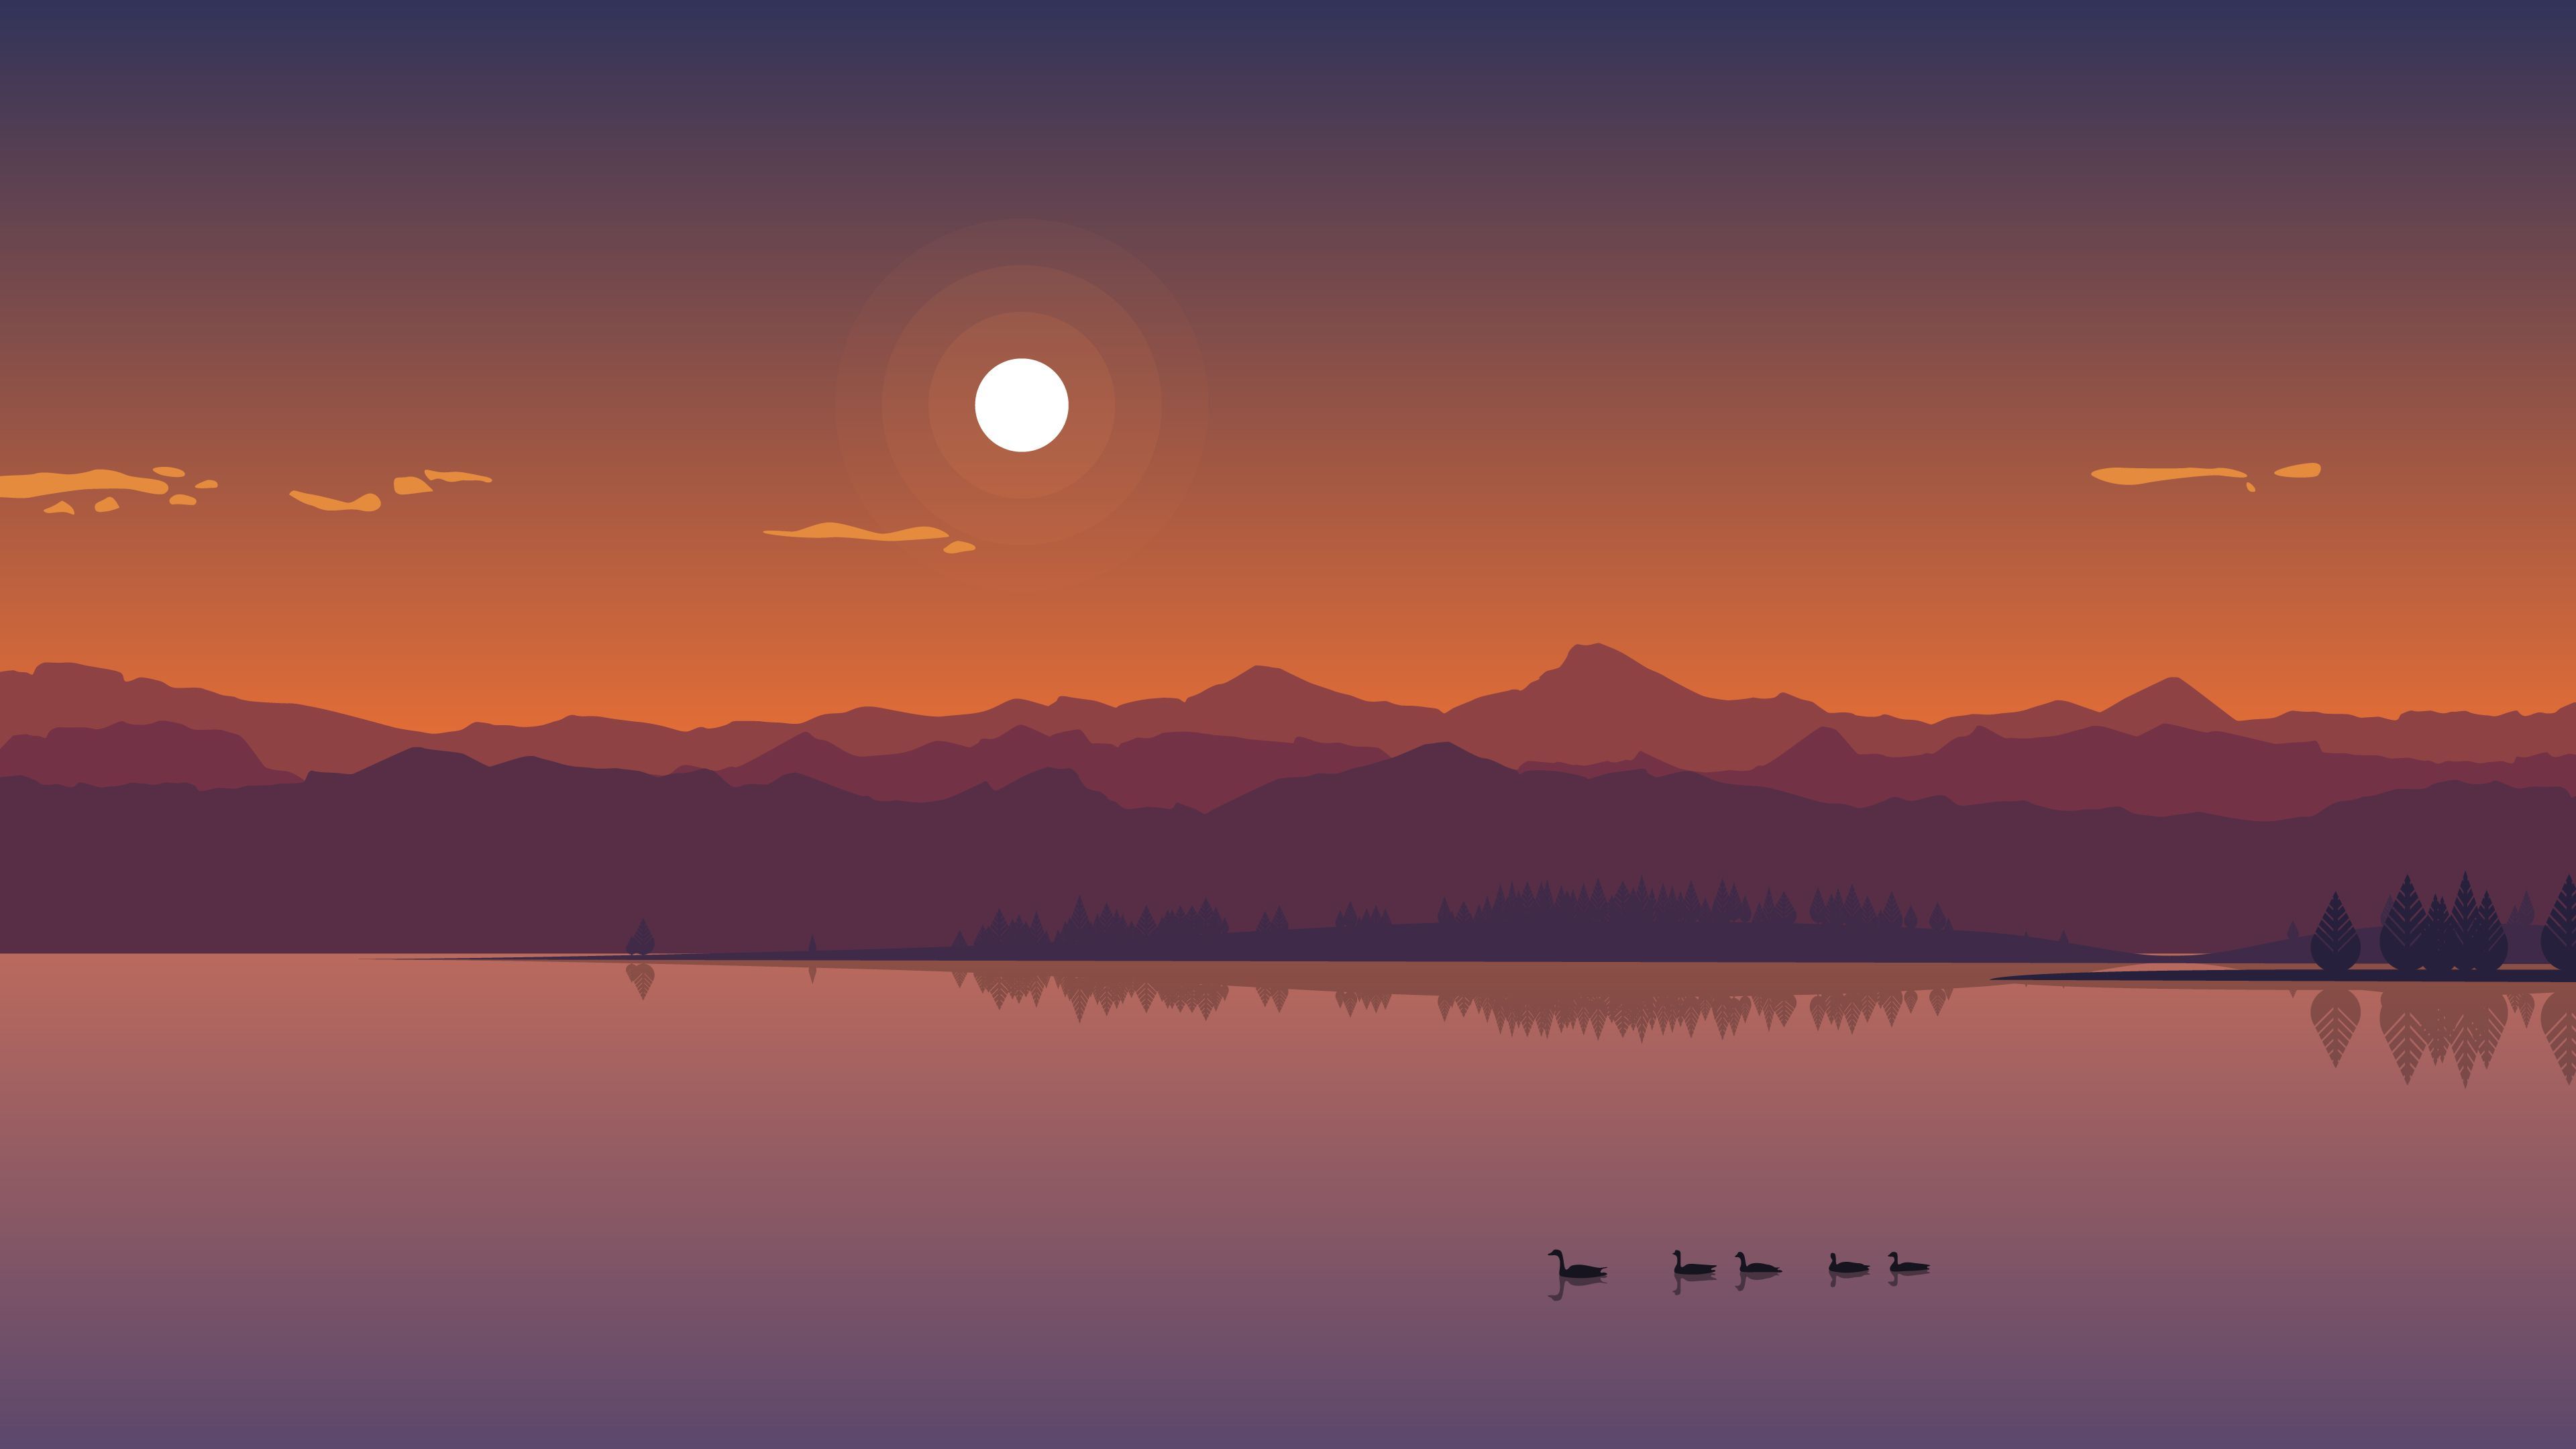 Star Wars Binary Sunset Poster i made this one the weekend was super fun   rStarWars